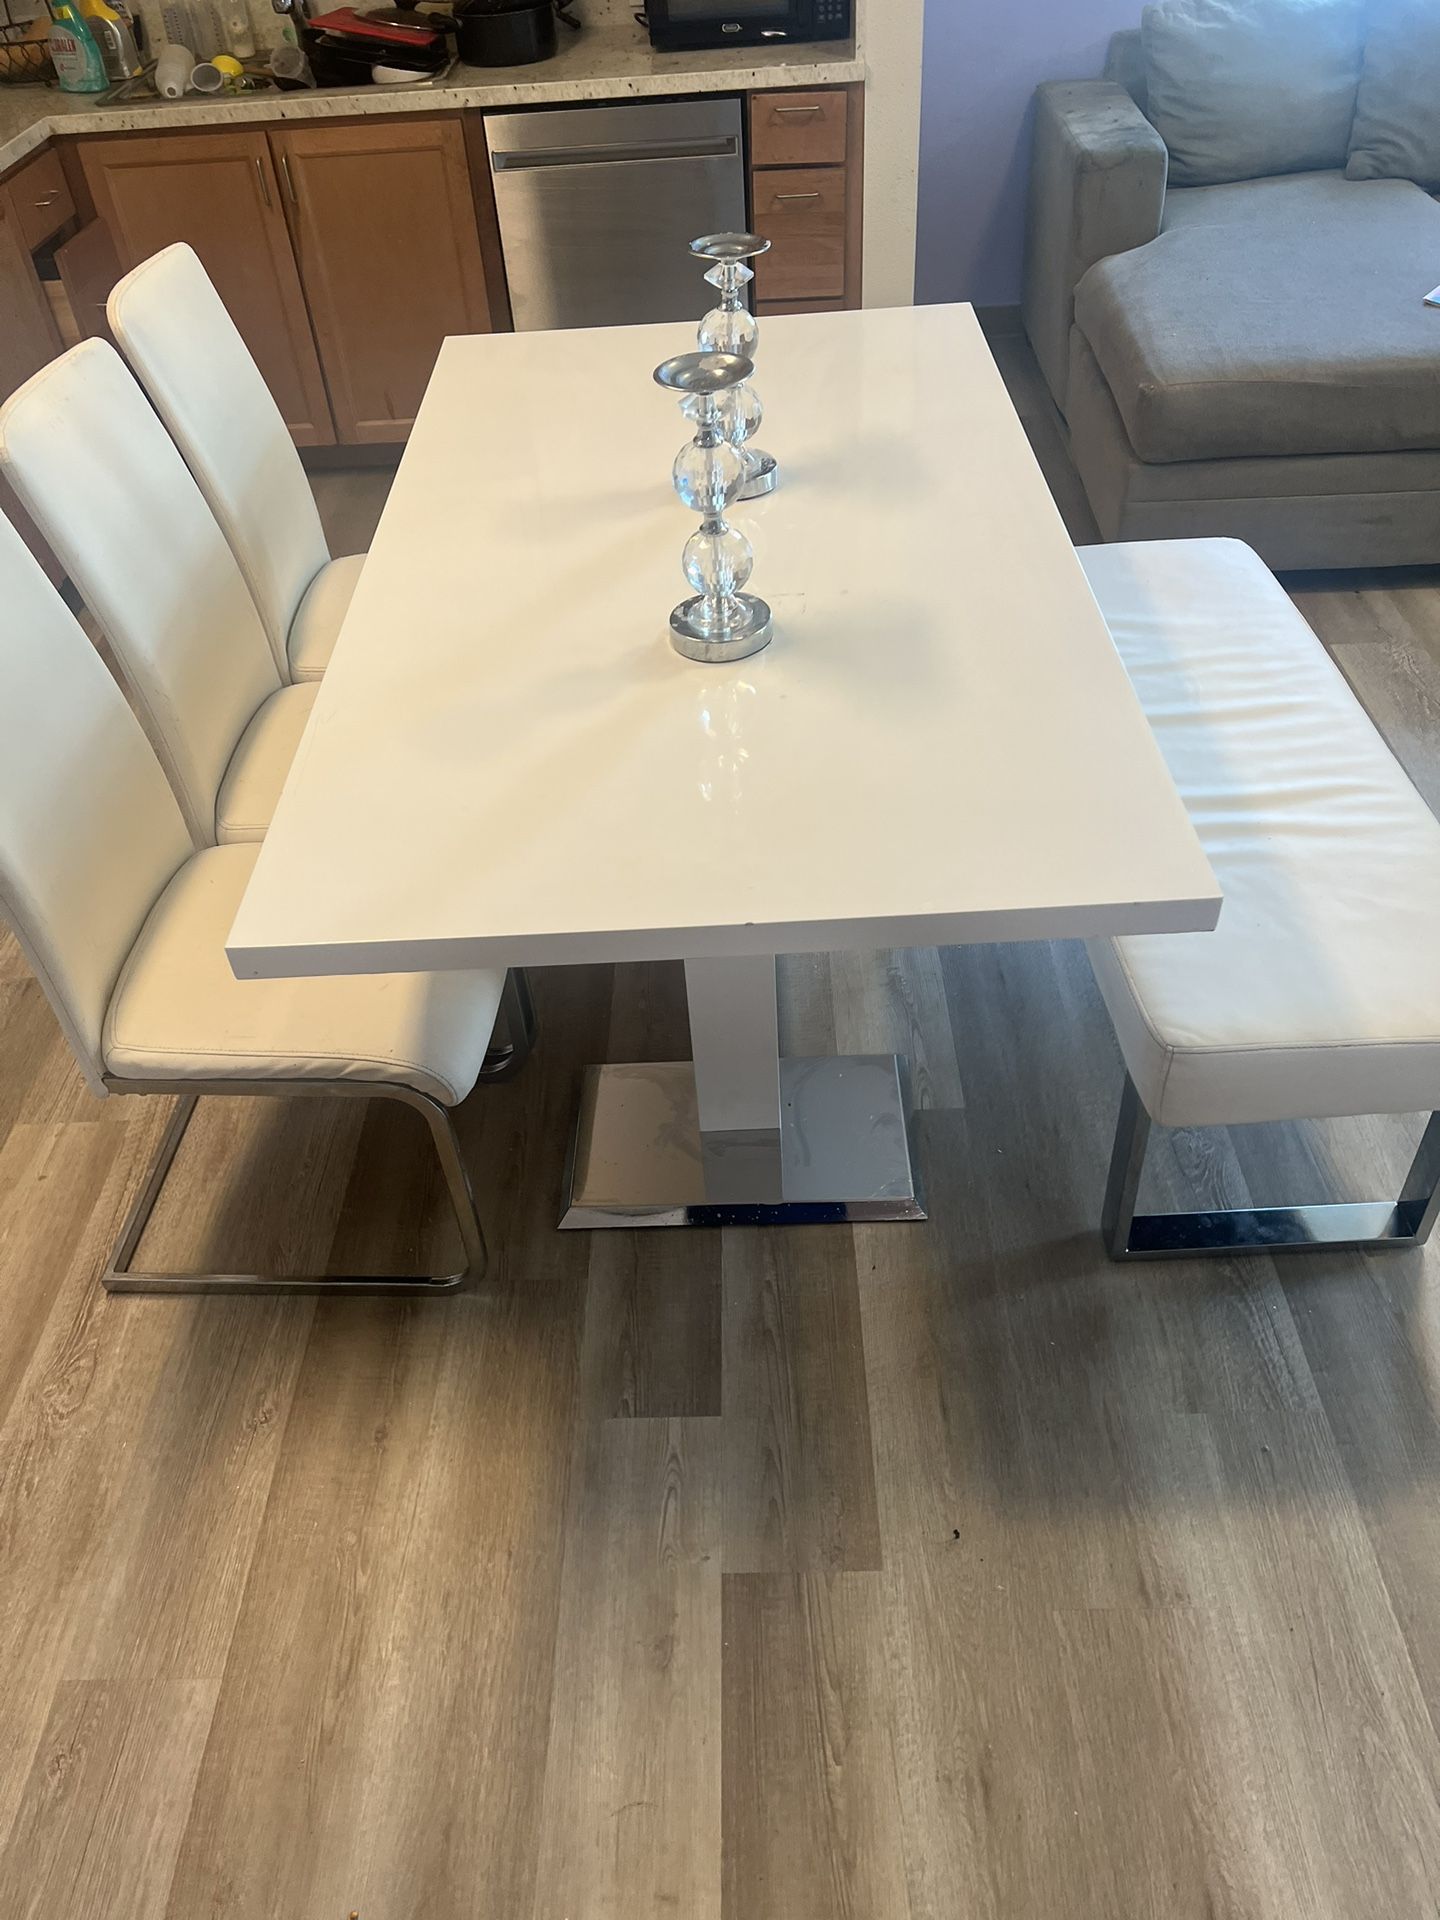 FREE TABLE, Chairs And Candle Holders 